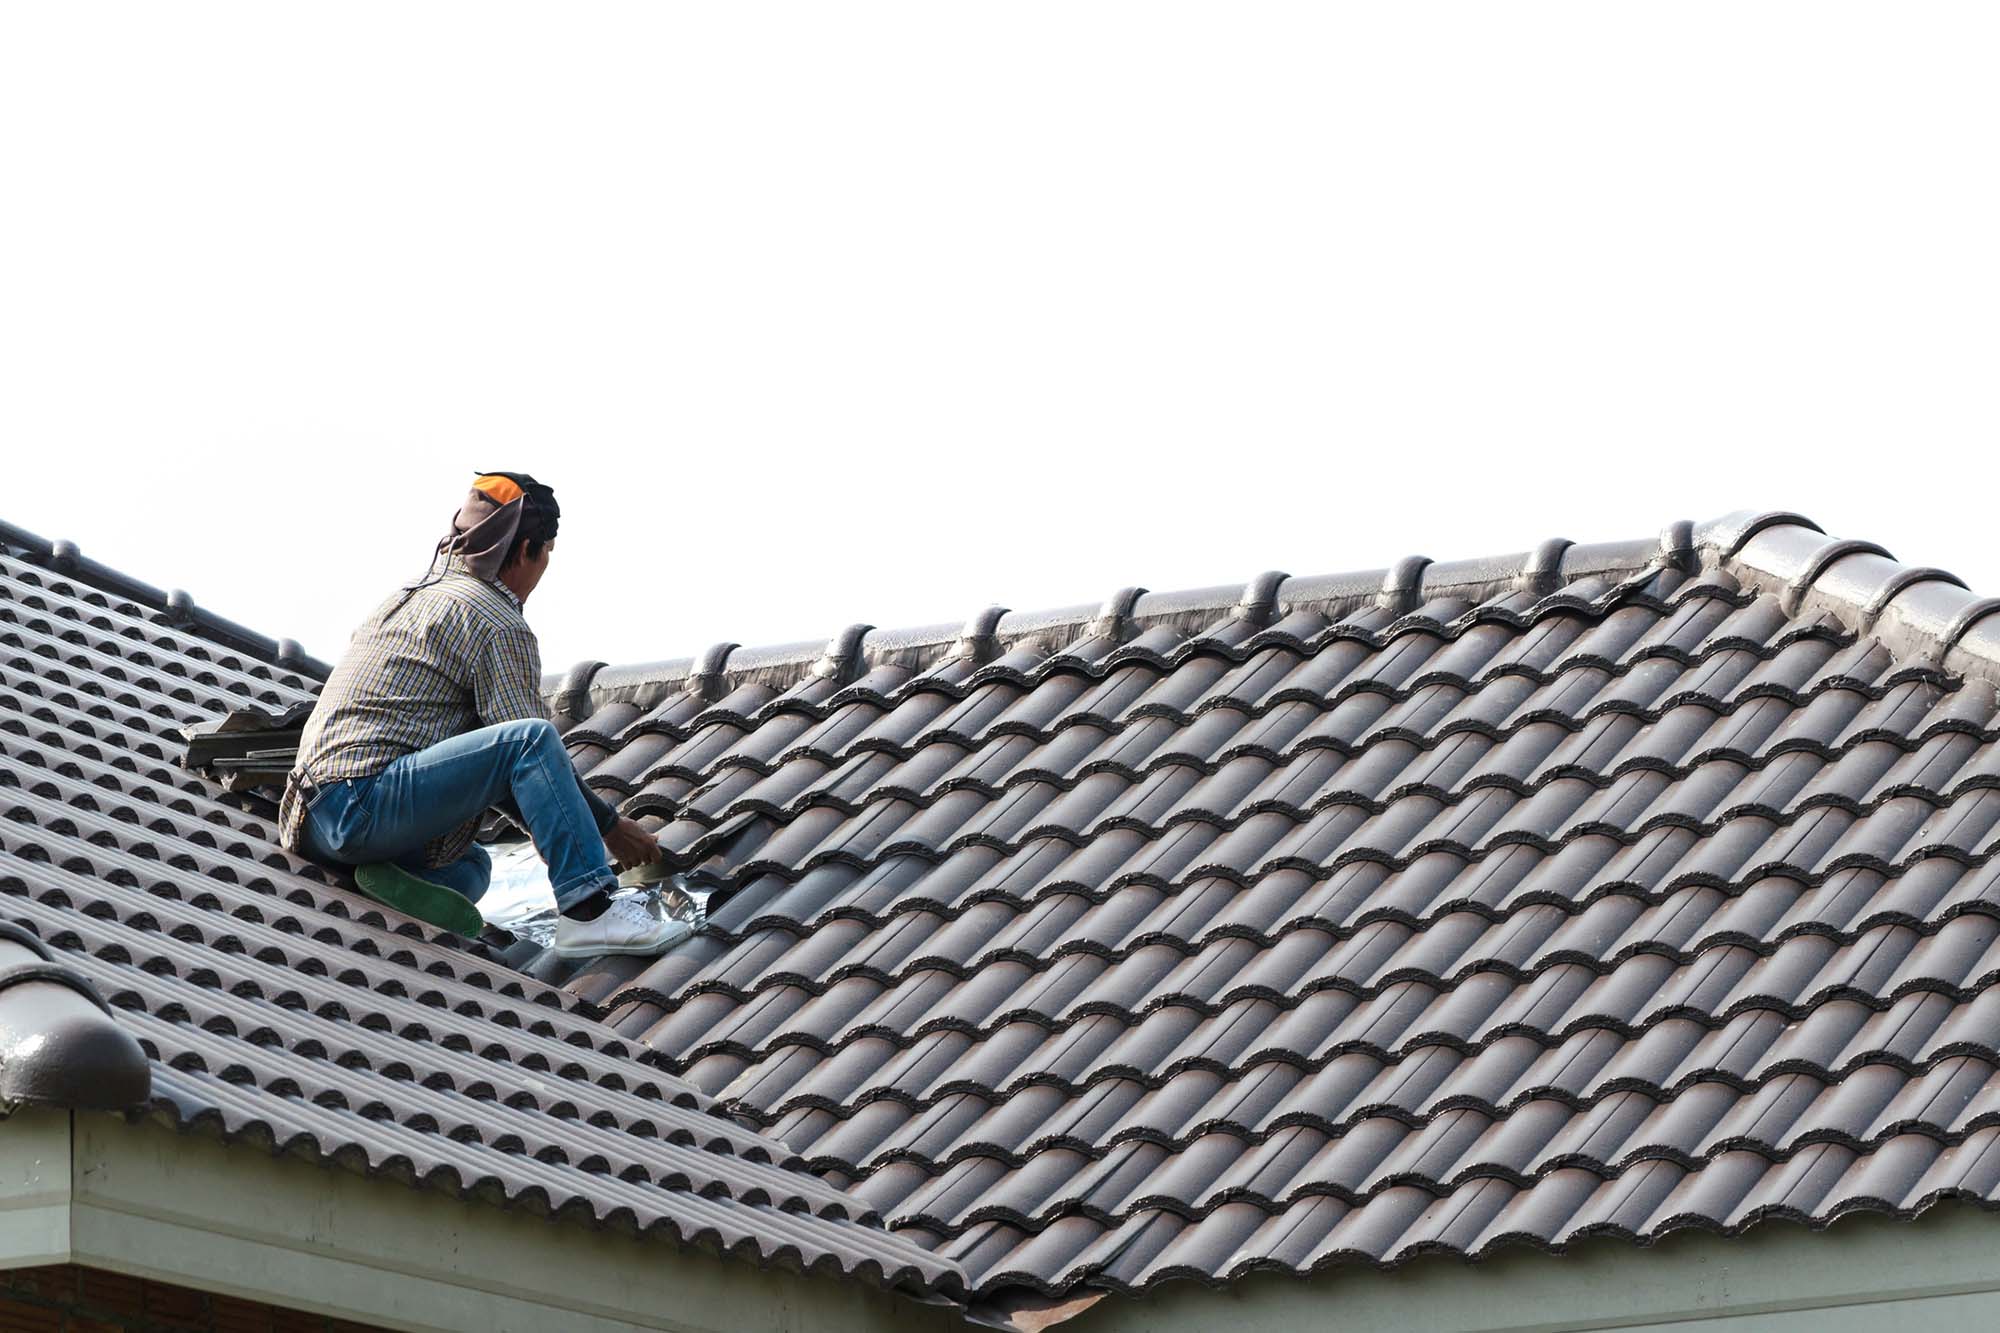 Man sitting on roof fixing tiles